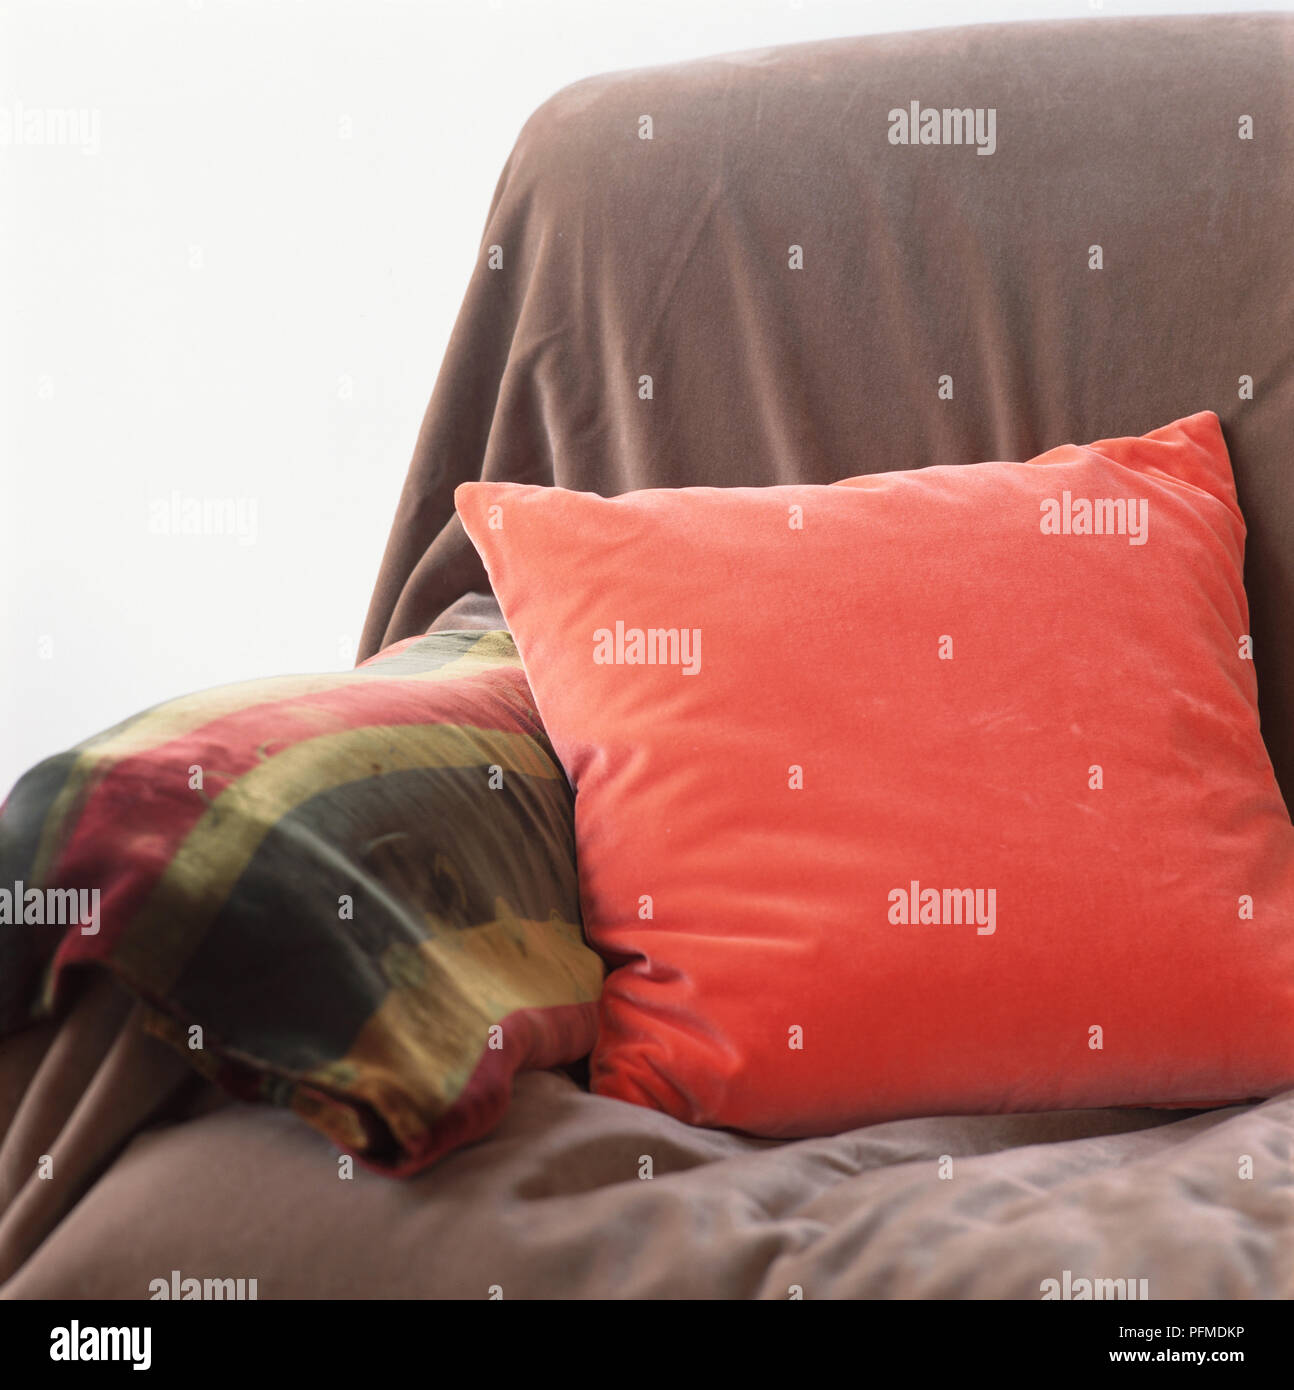 Sofa end covered with purple throw, red cushion scattered by arm, colourful blanket draped over arm. Stock Photo